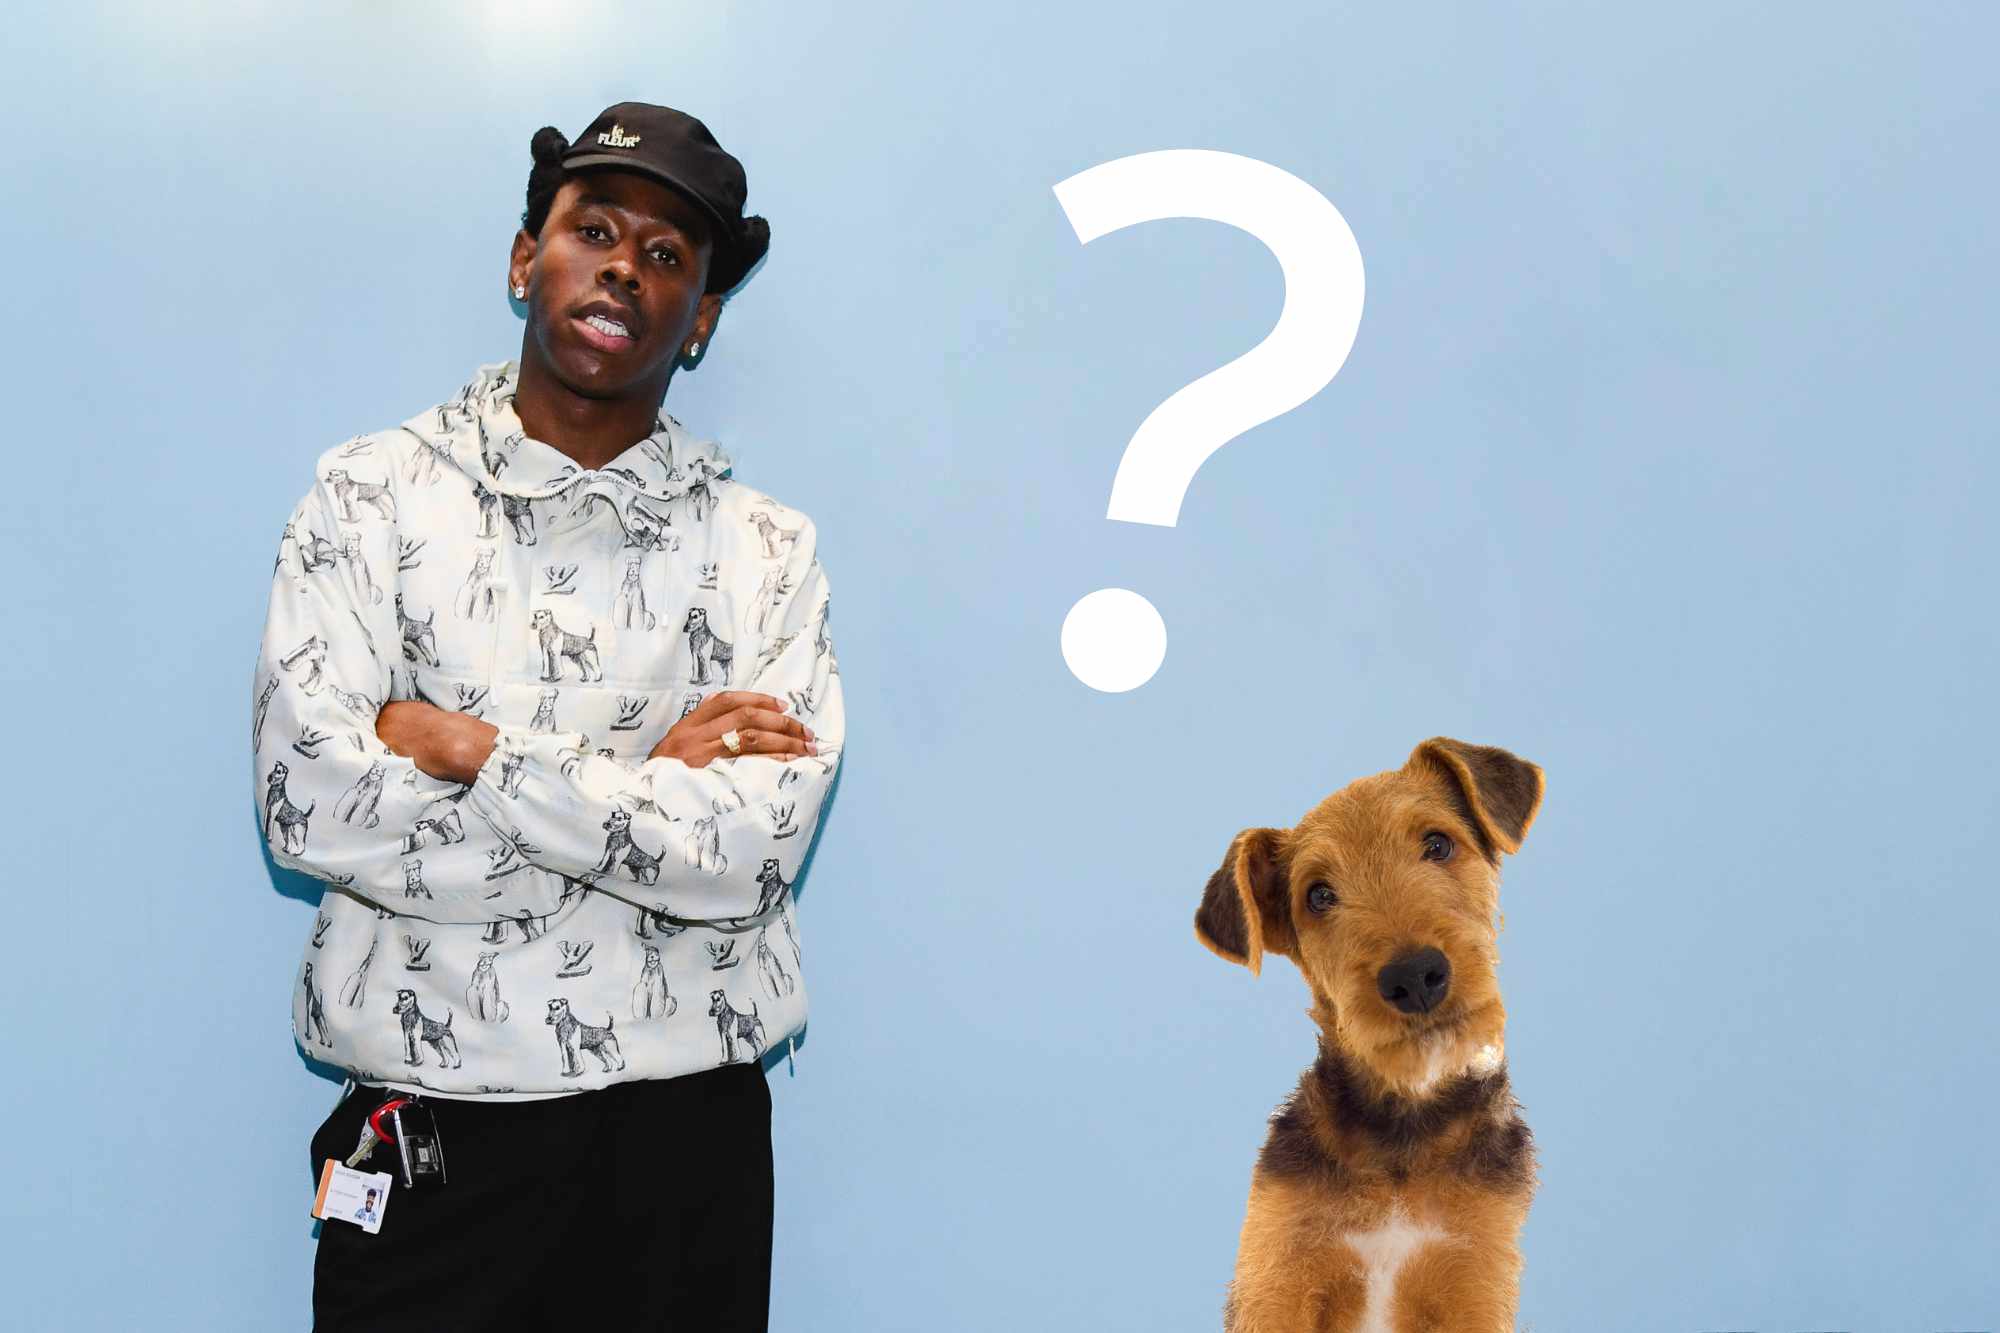 Tyler, the Creator & an Airedale Terrier dog